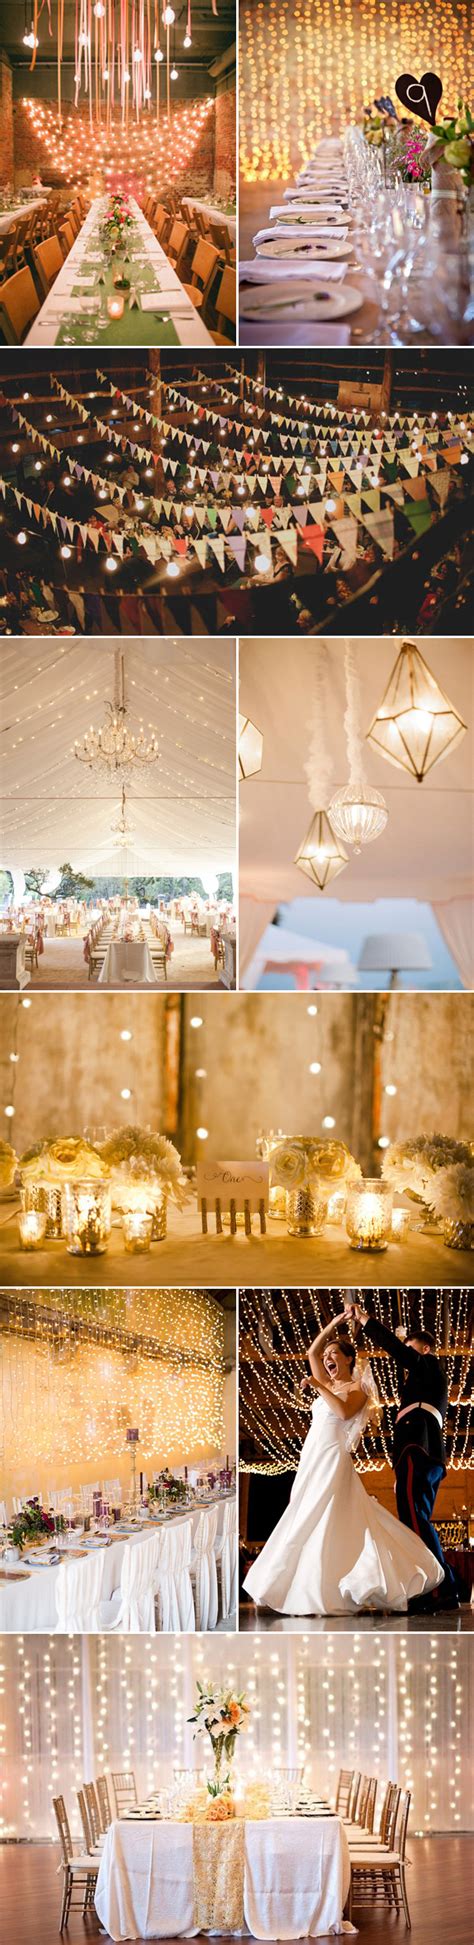 39 Magical String And Hanging Light Wedding Decorations